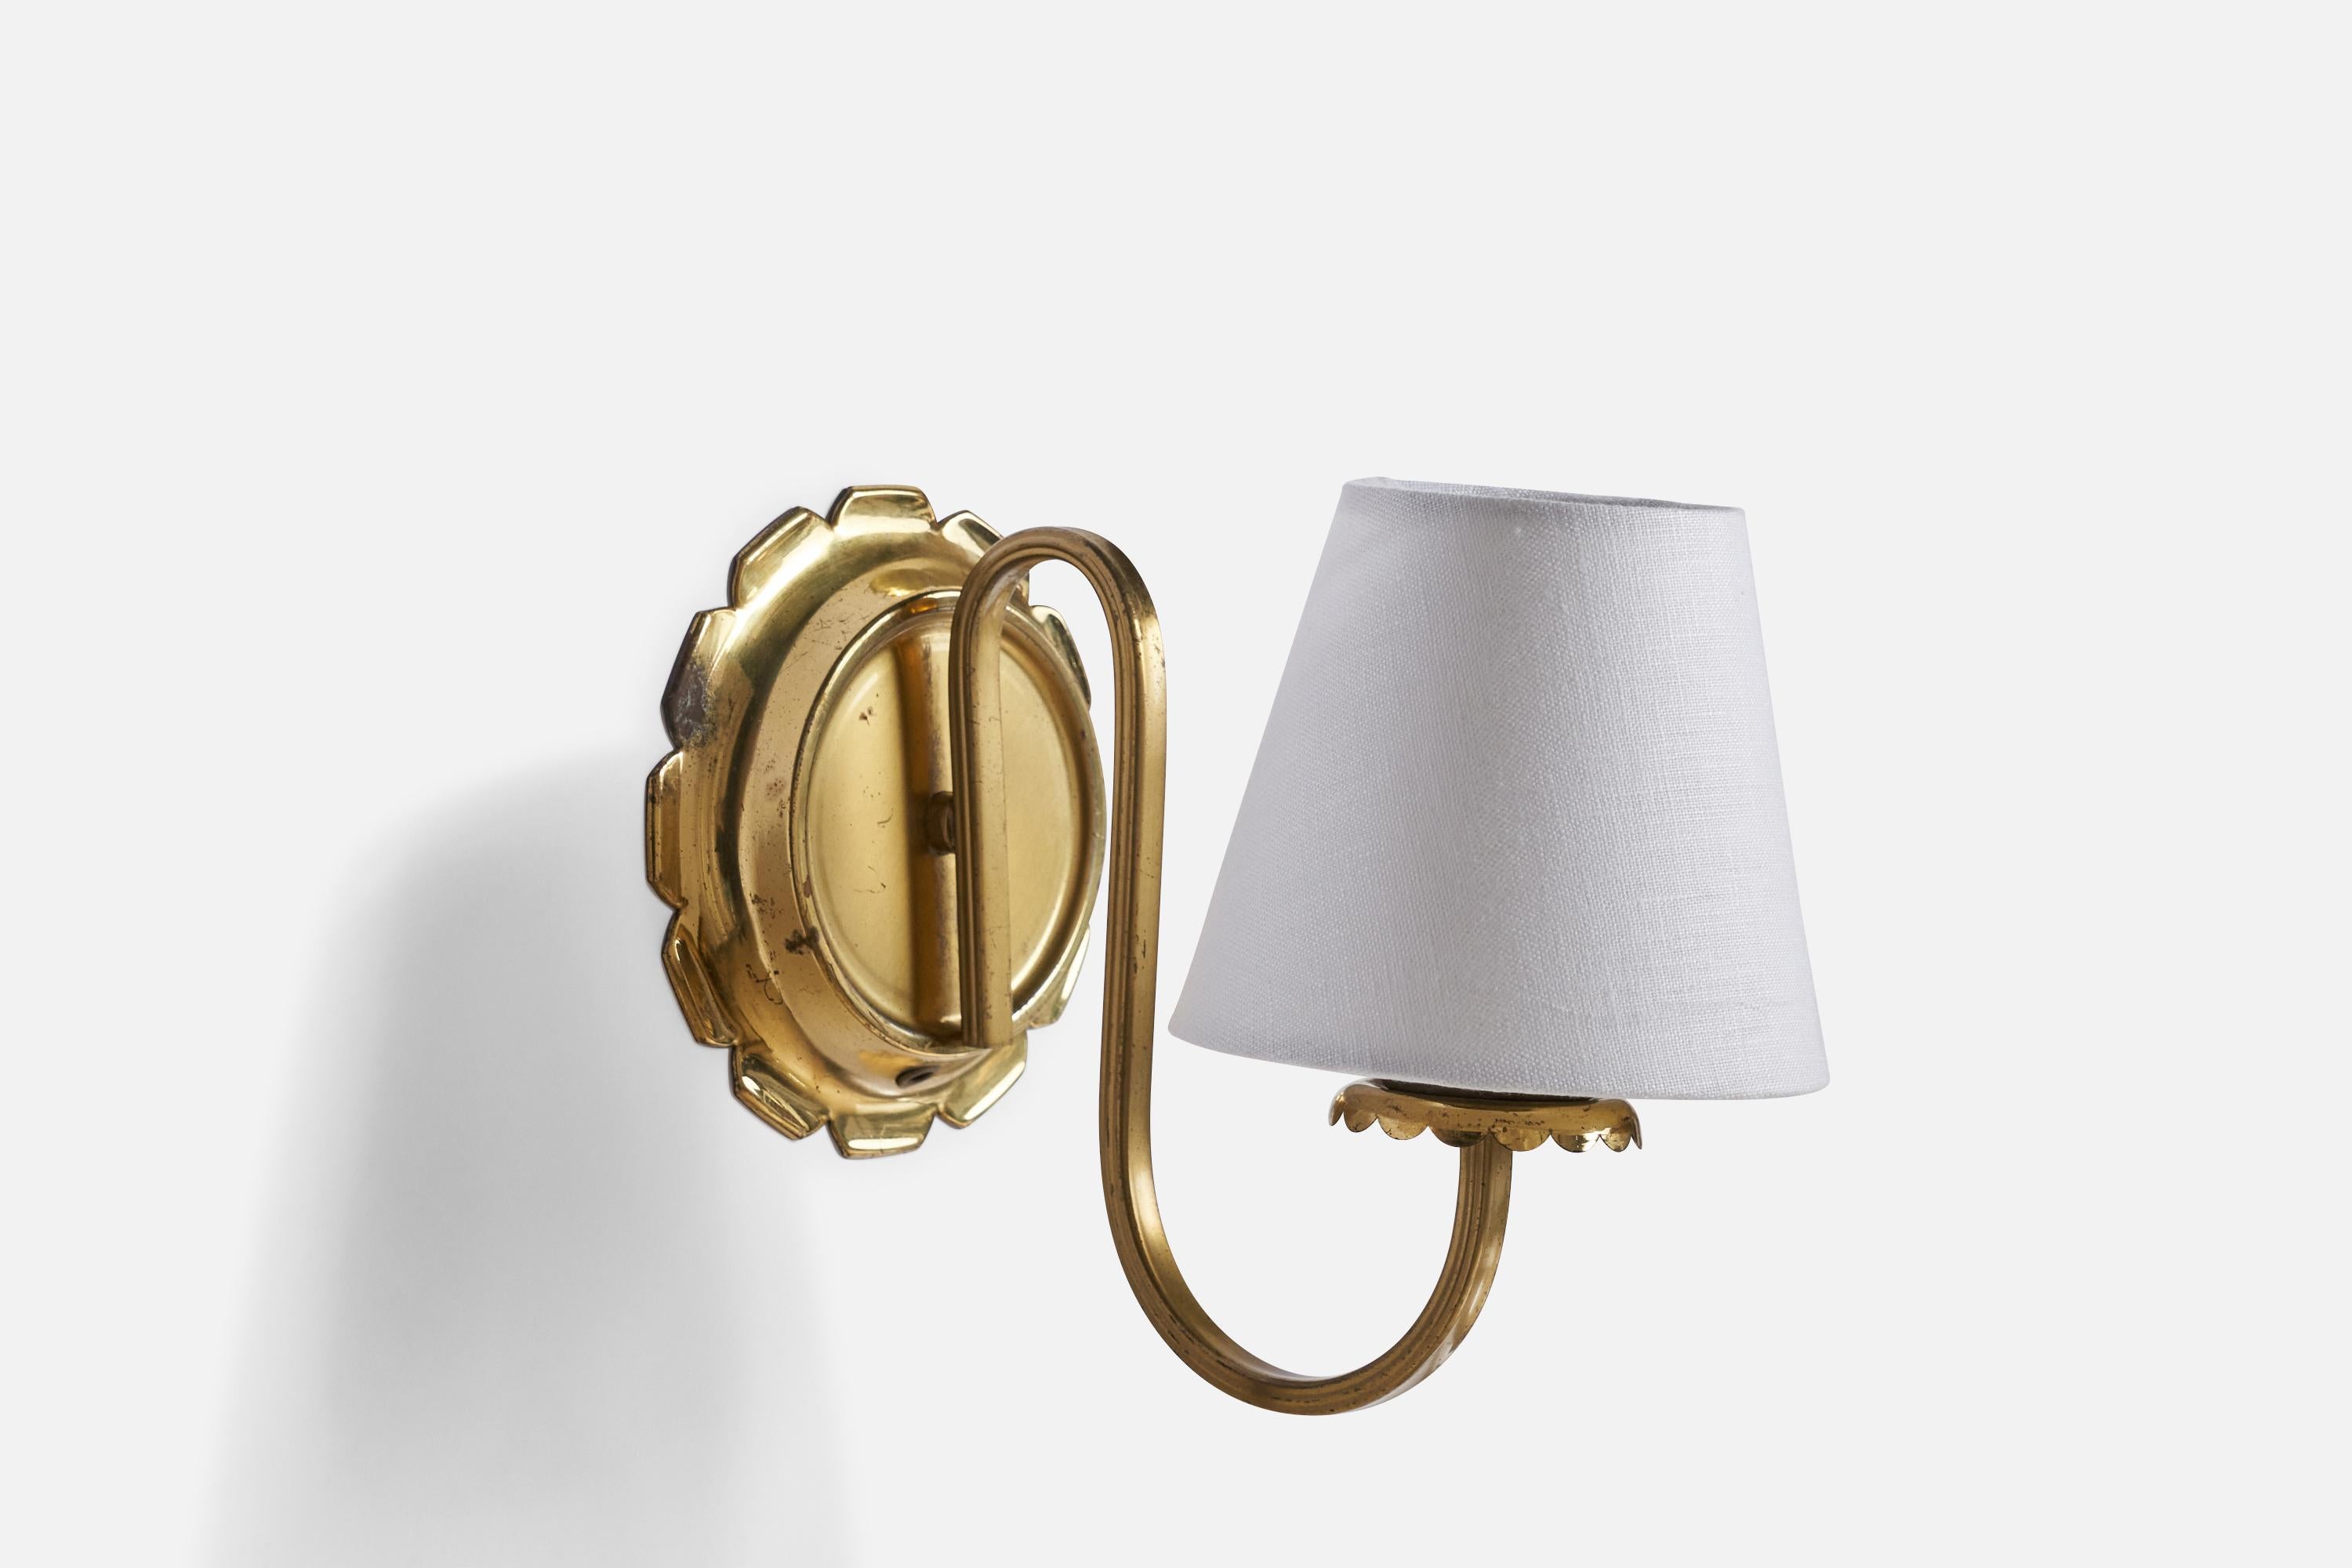 A brass and white fabric wall light designed and produced in Austria, 1940s.

Overall Dimensions (inches): 7” H x 5”  W x 9” D
Back Plate Dimensions (inches): 5.5” H x 5.5” W x 1.1” D
Bulb Specifications: E-26 Bulb
Number of Sockets: 2
All lighting